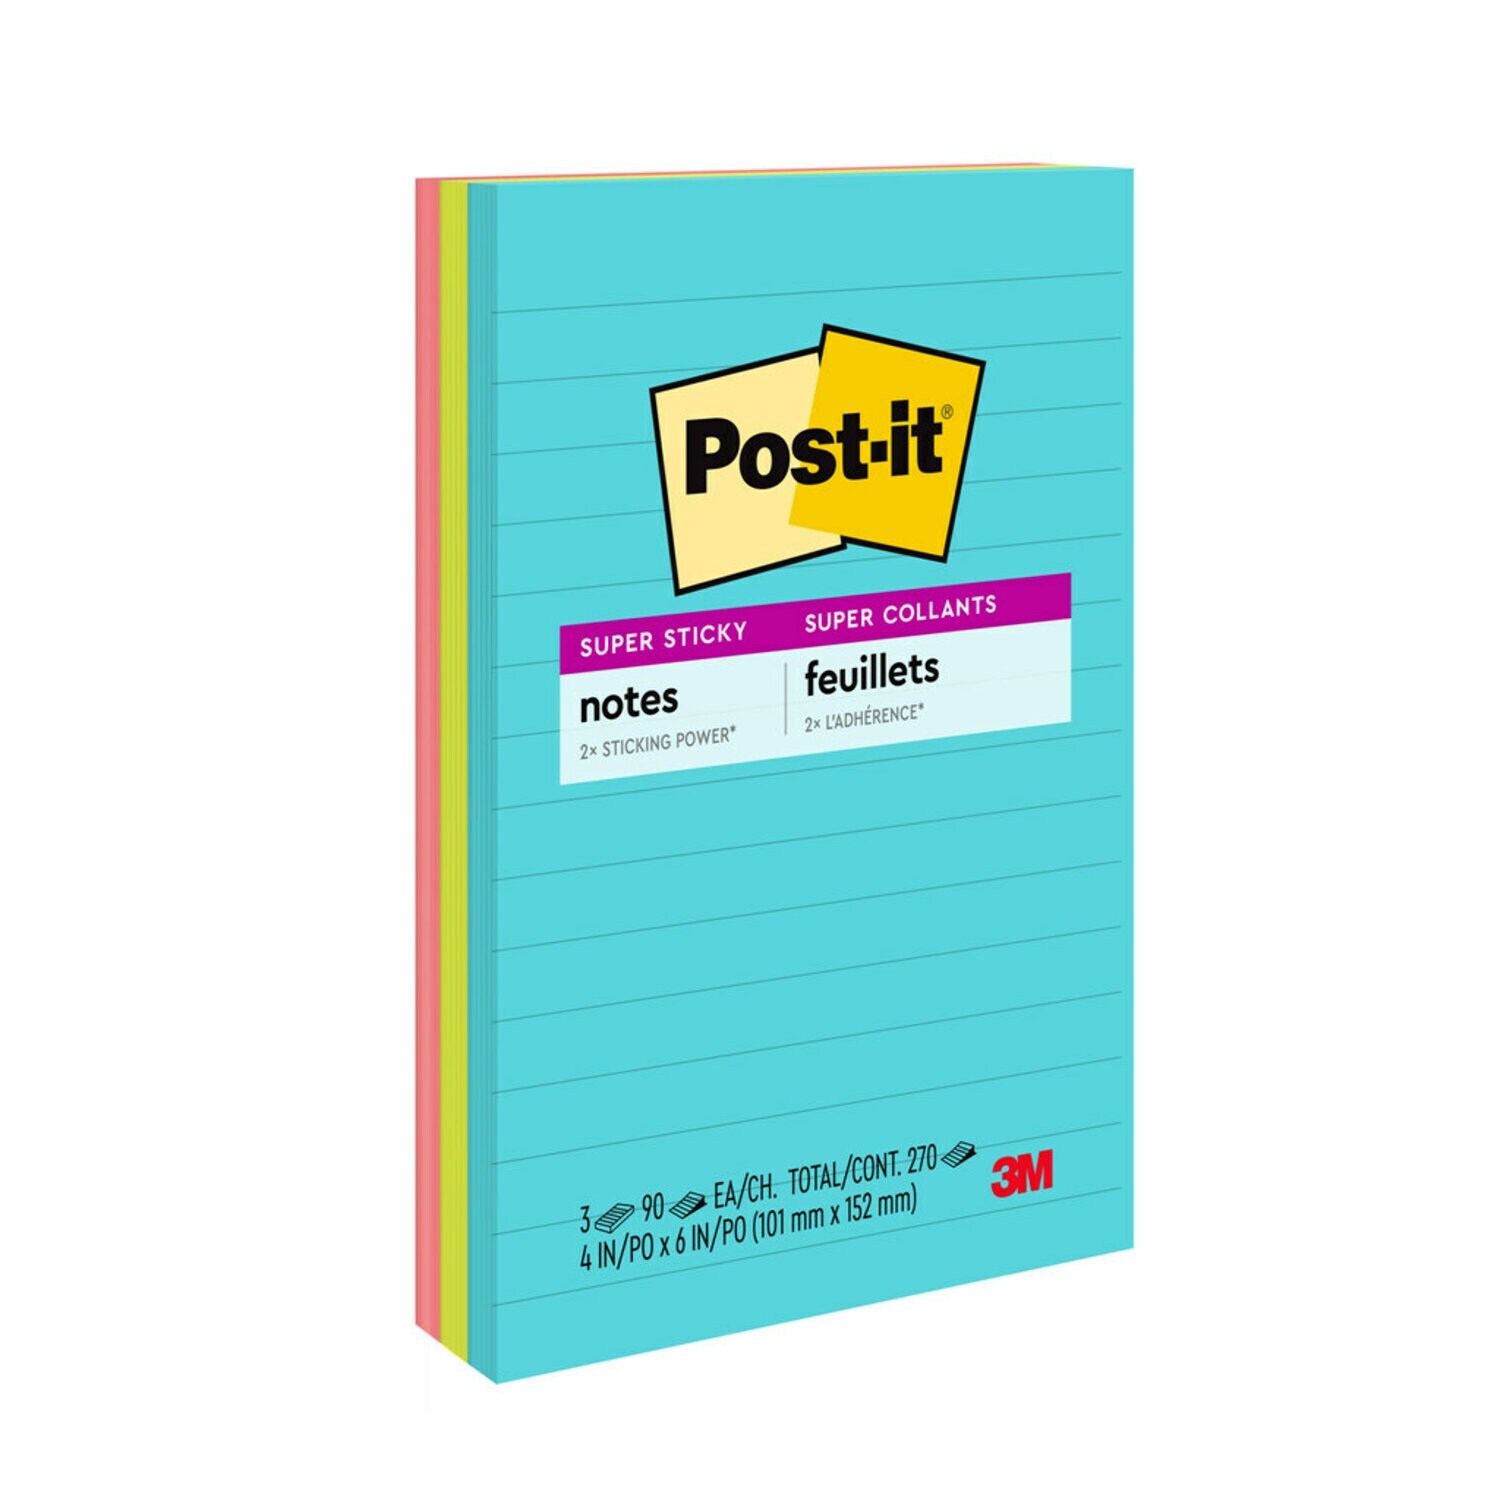 7100230246, Post-it Super Sticky Notes 660-3SSMIA, 4 in x 6 in (101 mm x  152 mm), Supernova Neons Collection, Aircraft products, notes--note-dispensers